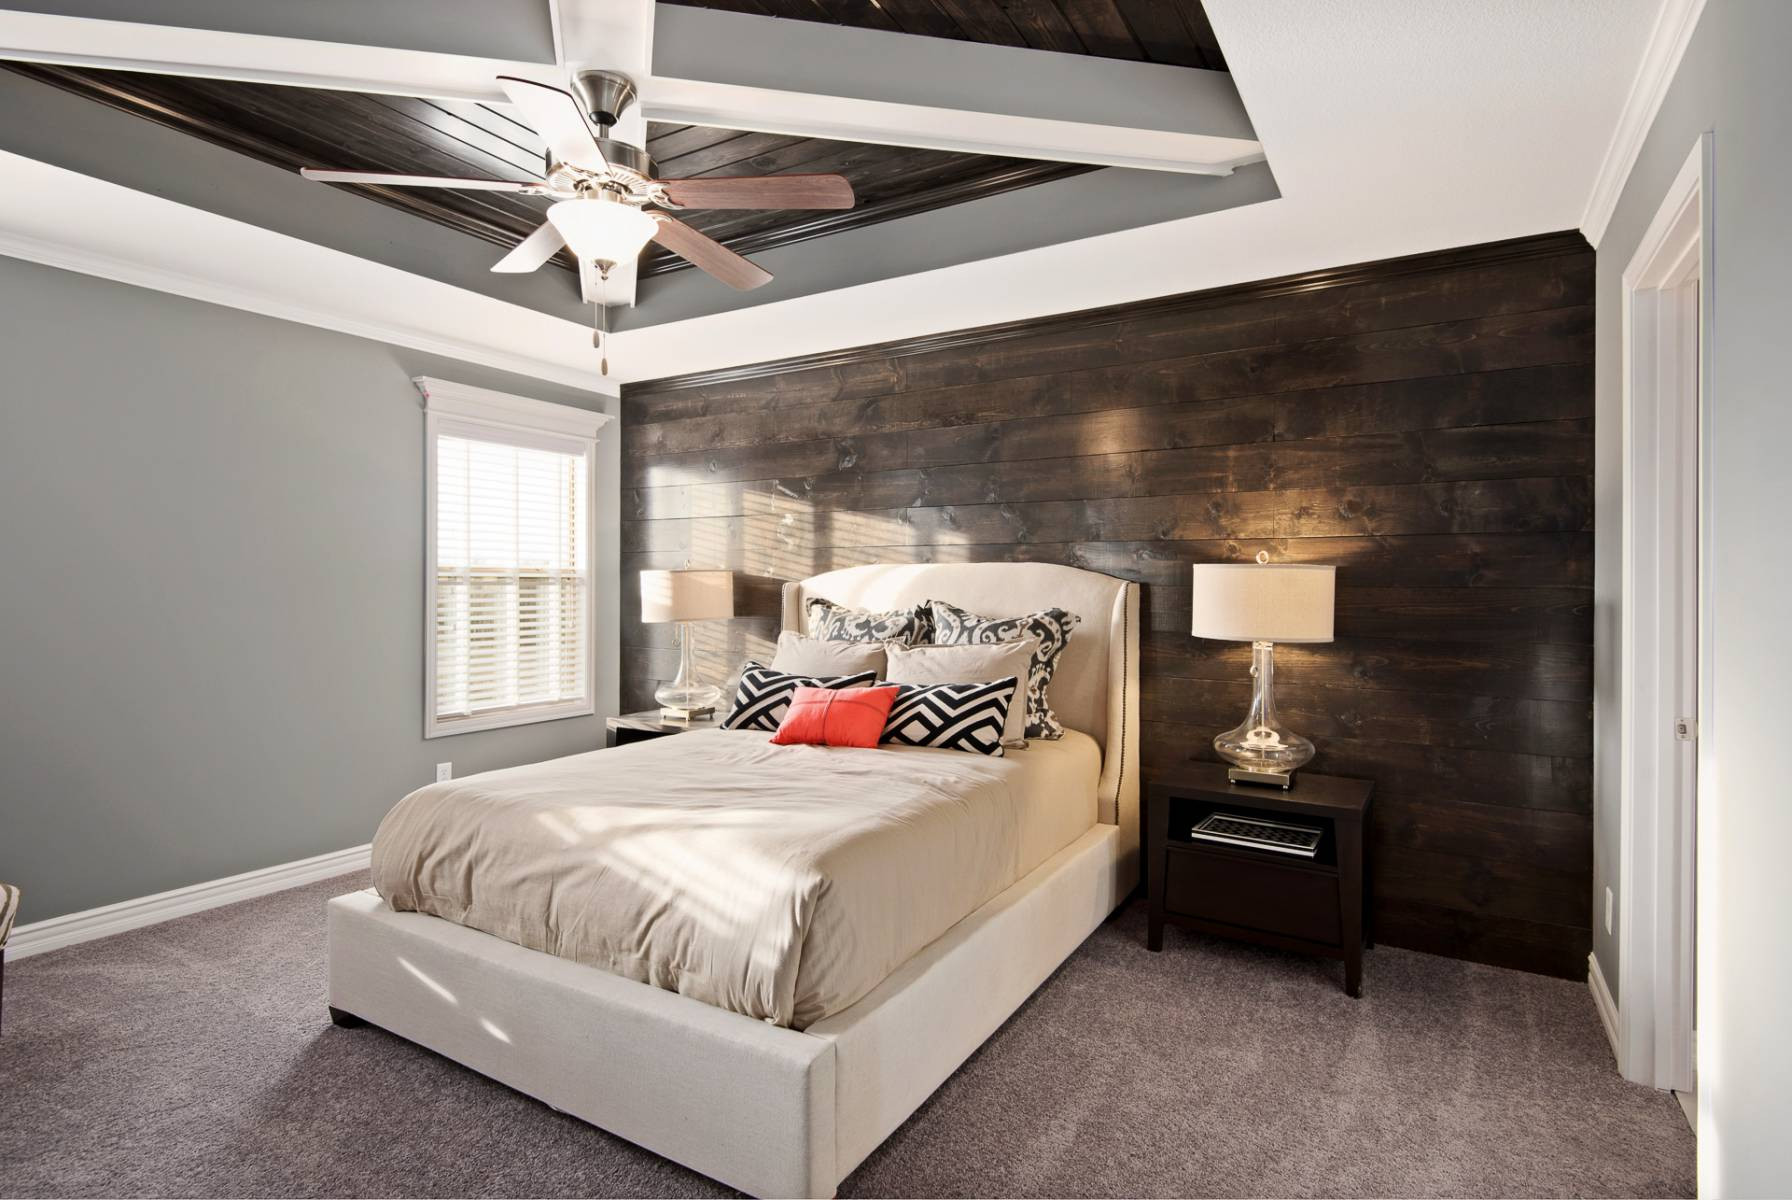 Wooden Accent Wall Bedroom
 Reclaimed Wood Bedroom Accent Wall Iowa Remodels